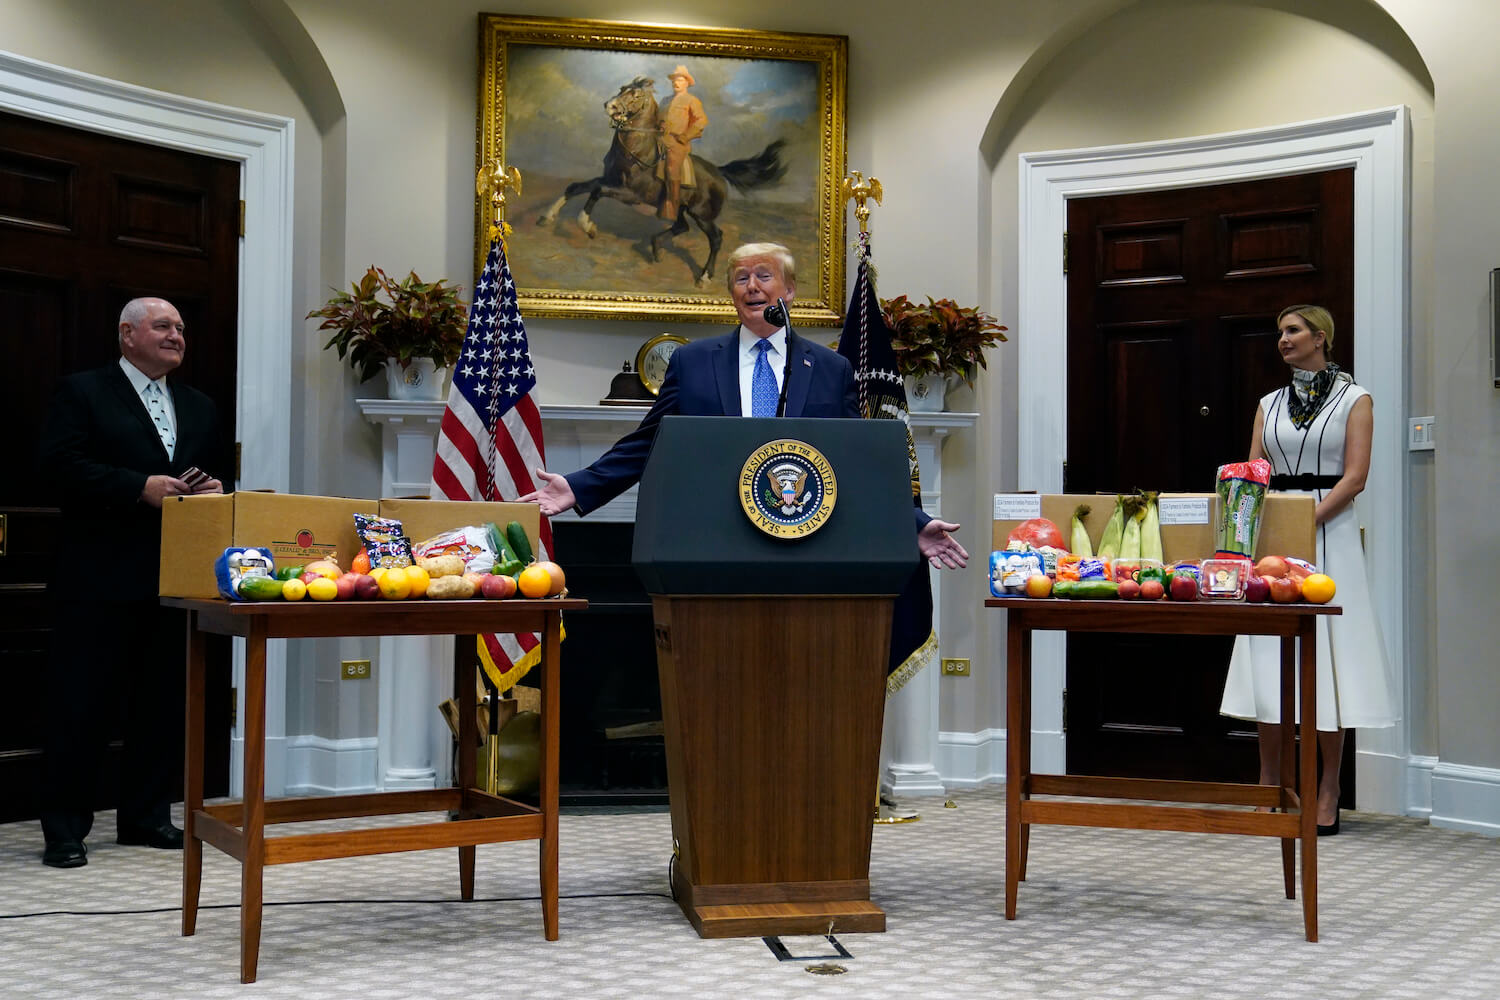 President Donald Trump speaks about the food supply chain during the coronavirus pandemic, in the Roosevelt Room of the White House, Tuesday, May 19, 2020, in Washington. Agriculture Secretary Sonny Perdue, left, and Ivanka Trump, the daughter of President Donald Trump, listen. (May 2020)